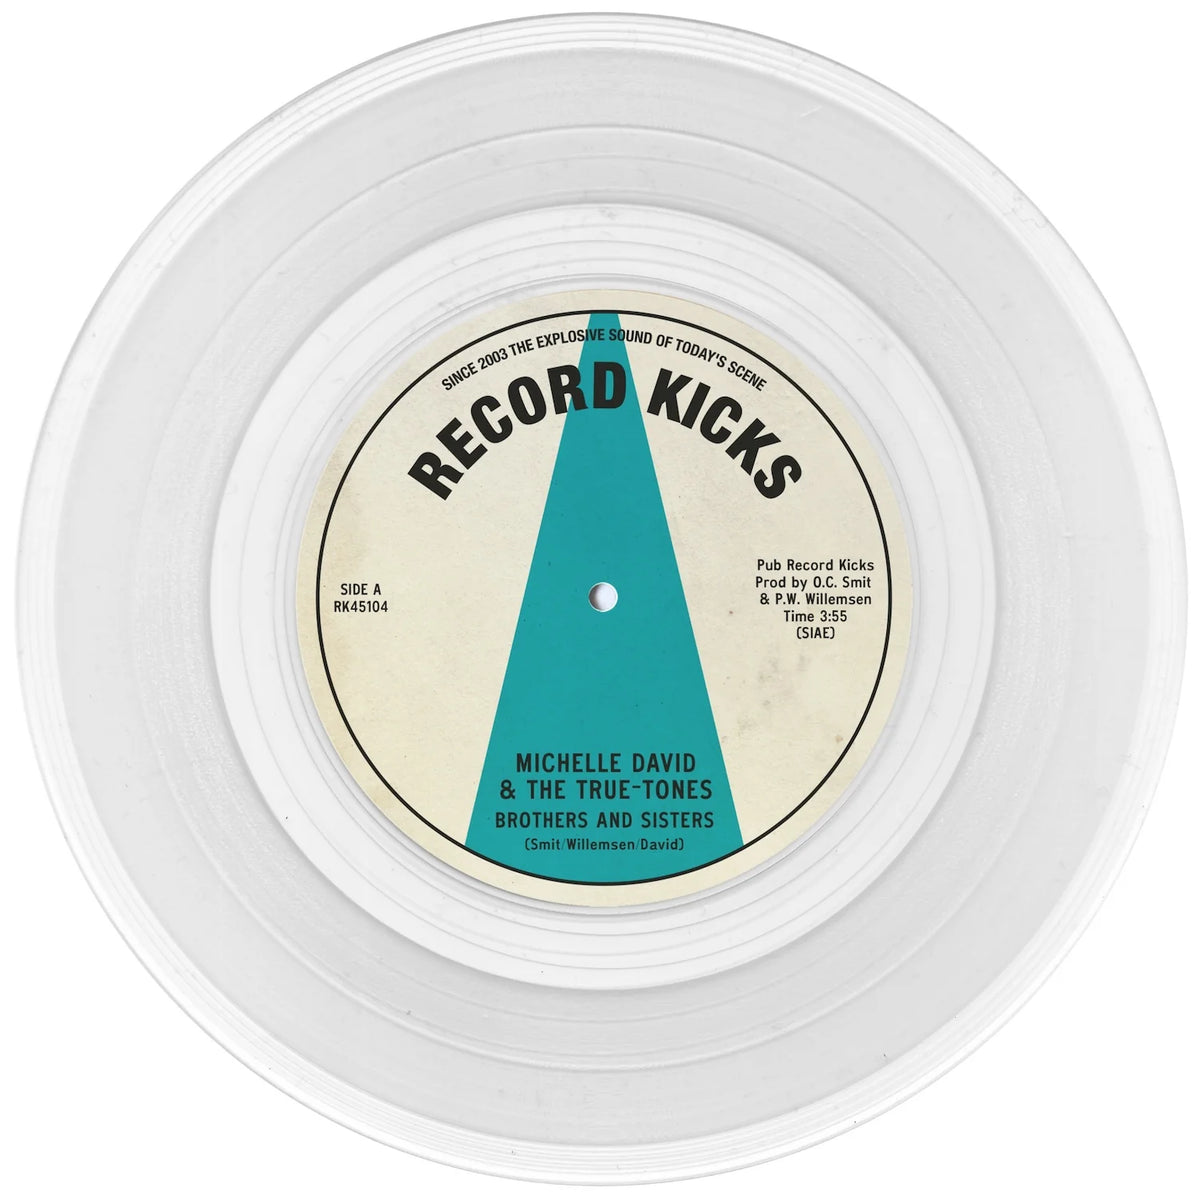 Michelle David & The Truth-Tones - Brothers And Sisters b/w That Is You